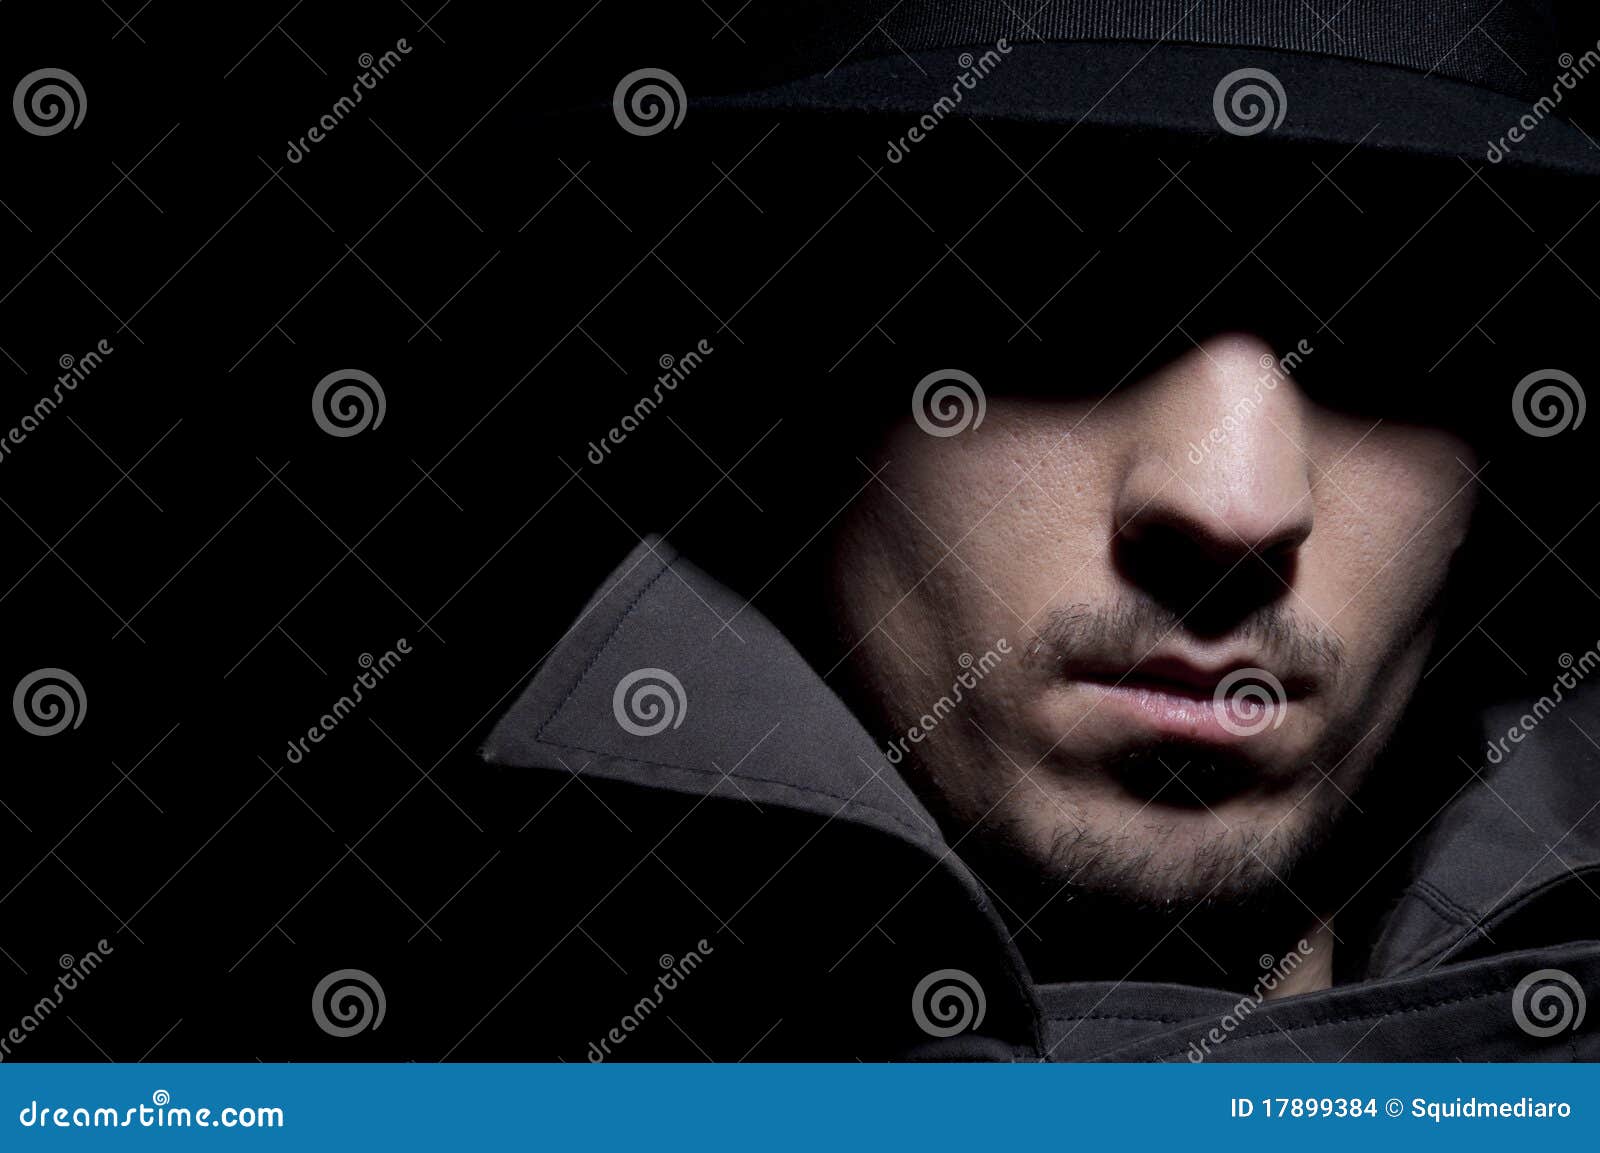 Criminal stock photo. Image of inspect, eyes, private - 17899384